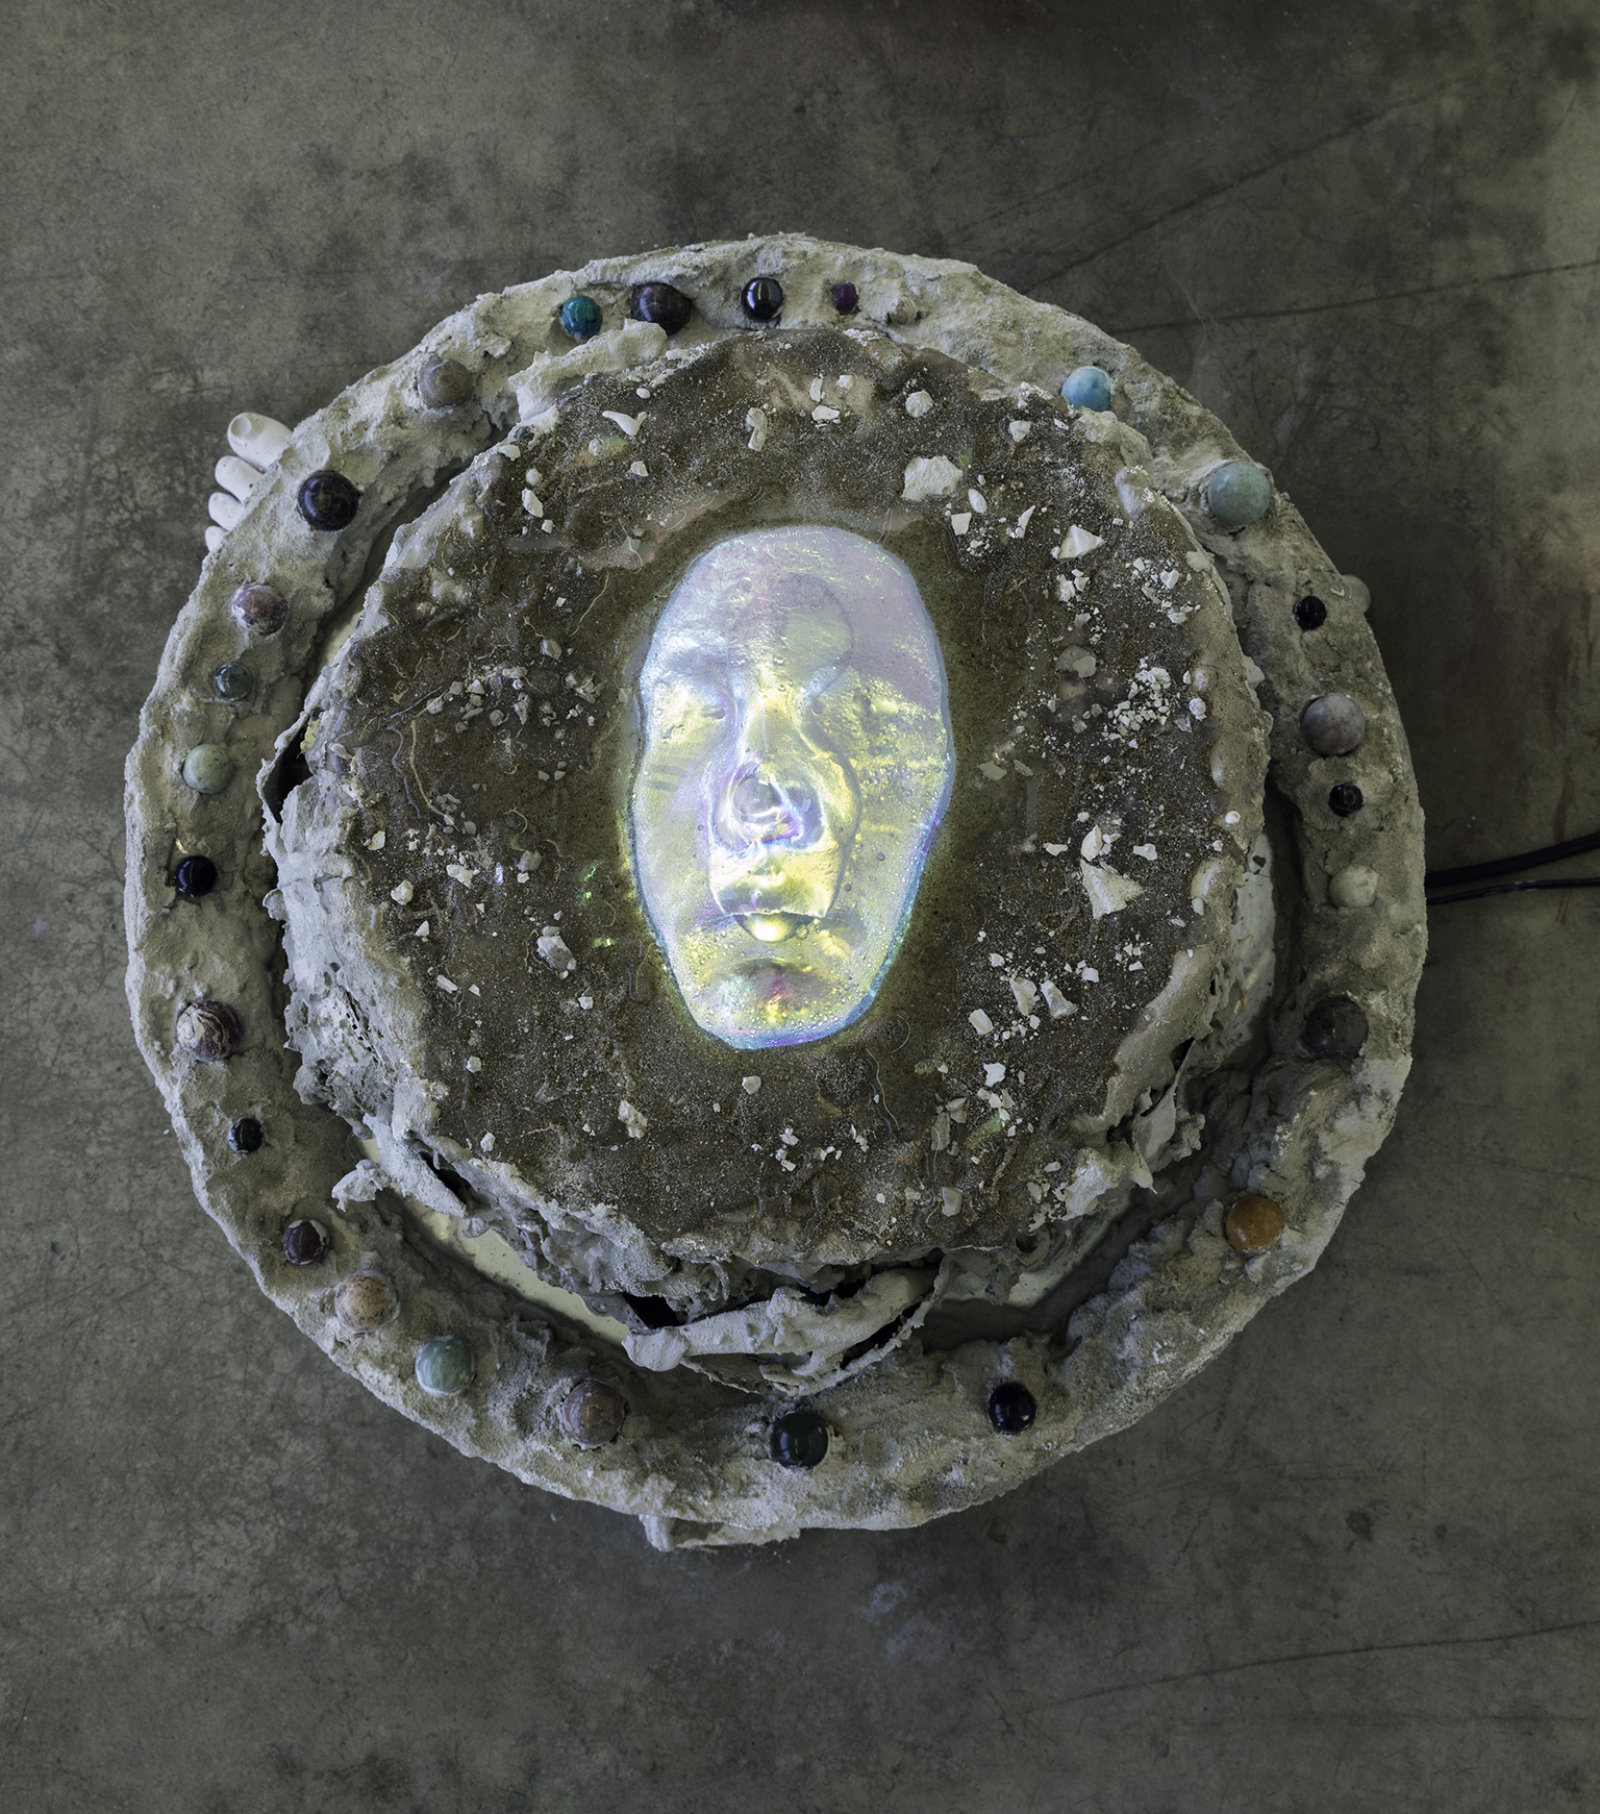 Kasper Feyrer, “I” (detail), 2017, dichroic glass face, concrete, miscellaneous aggregate, mineral marbles, water, 25 x 25 x 21 in. (62 x 62 x 53 cm)